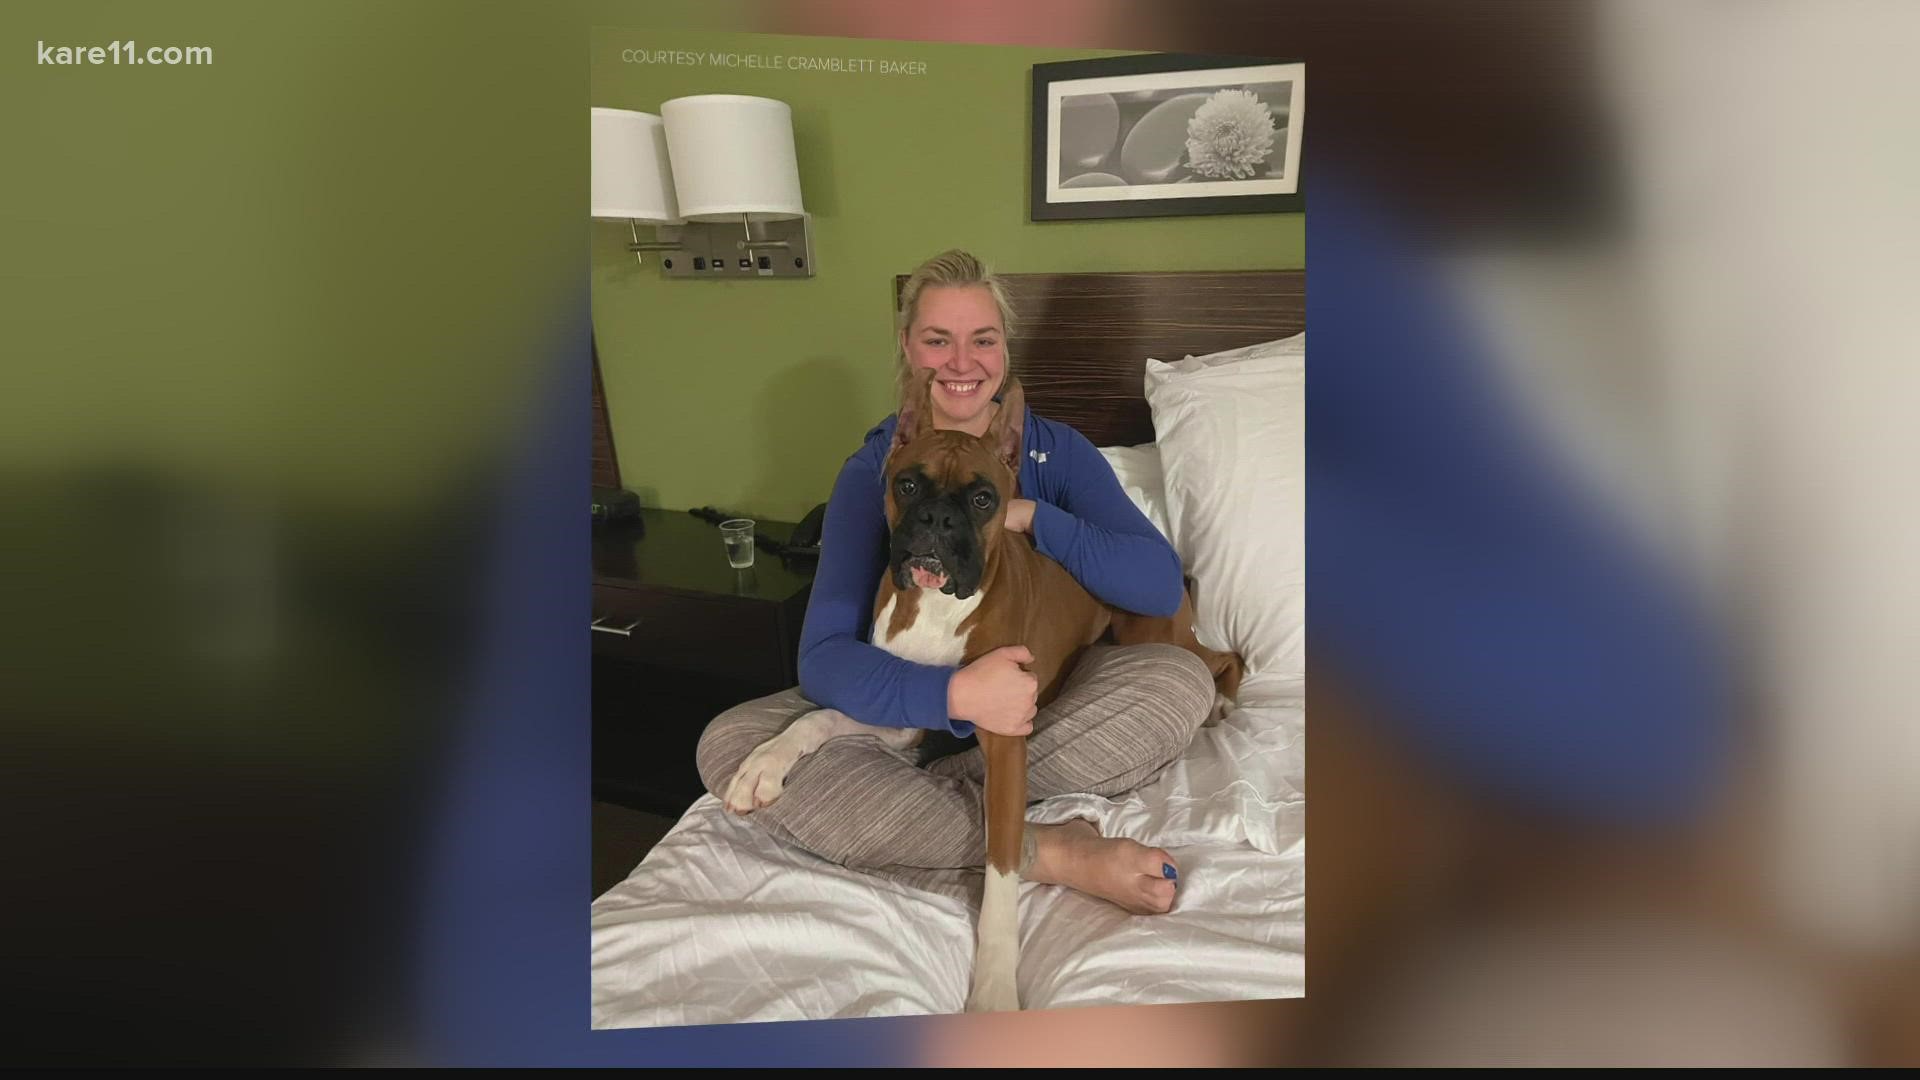 The dog and a minivan were stolen Saturday, and thanks to some good Samaritans, both were found Monday night.